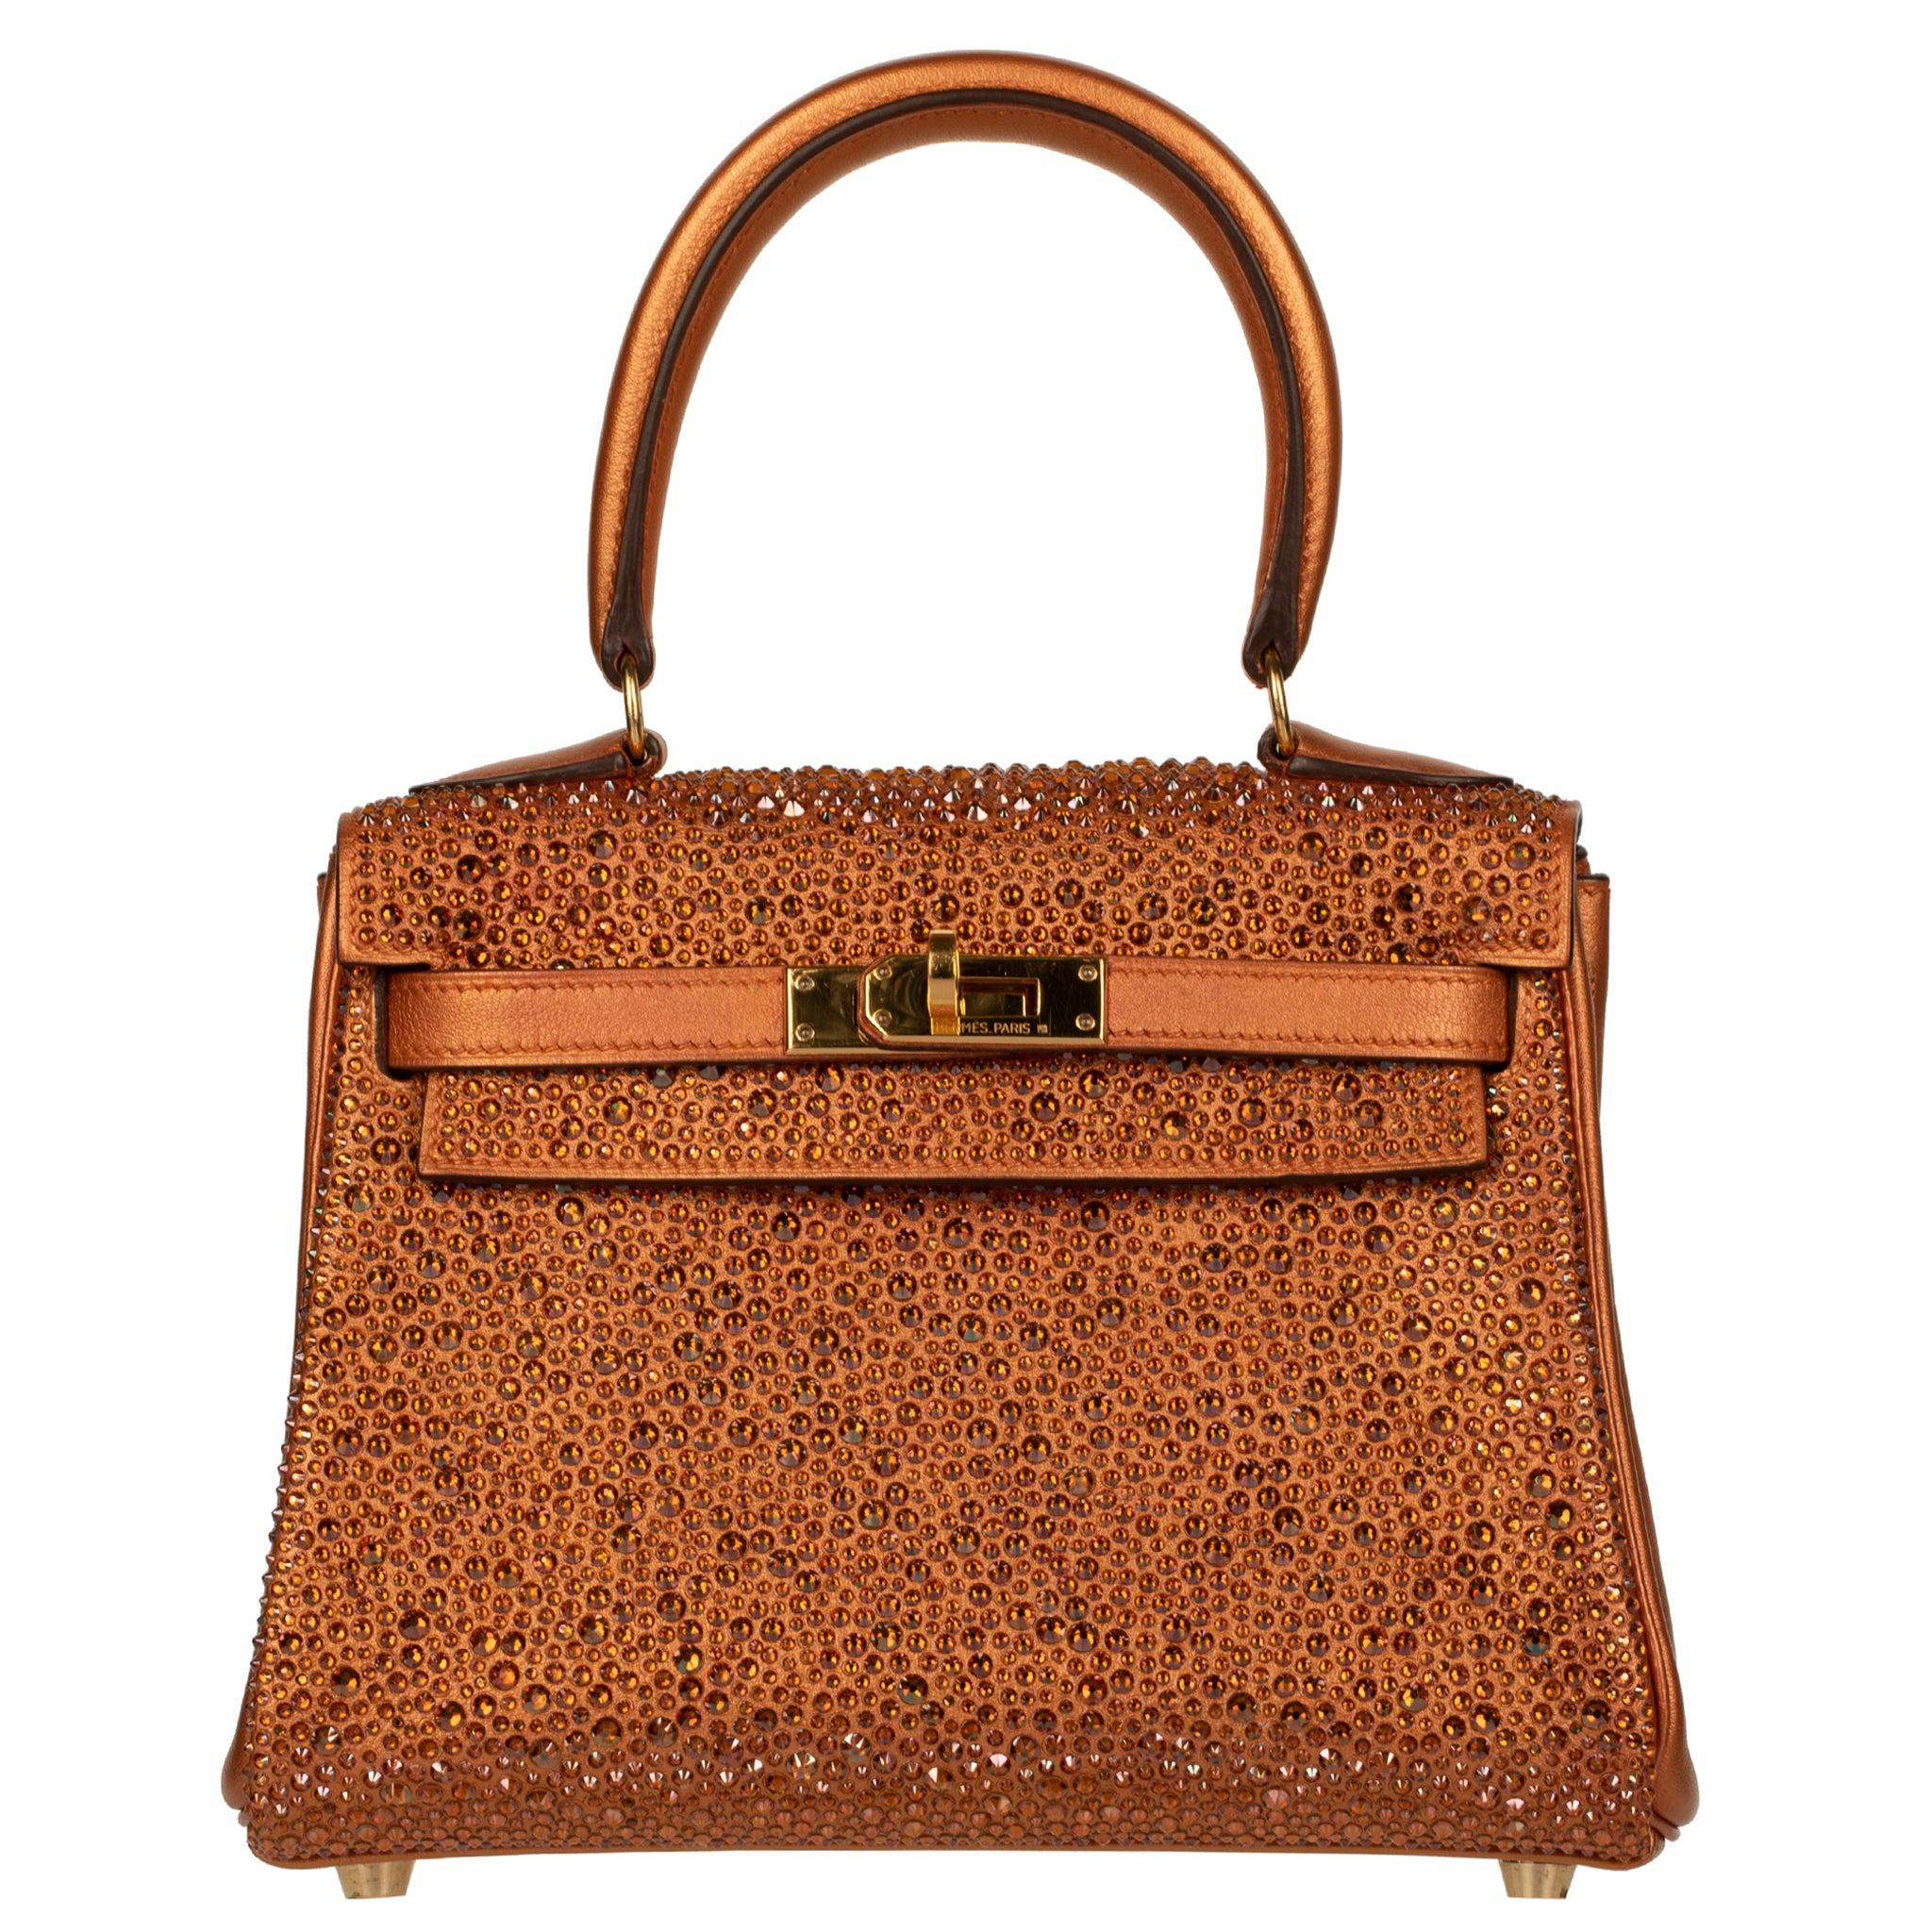 1stdibs Exclusives From Three Over Six

Brand: Hermès
Style: Kelly Retourne
Color: Metallic Copper
Leather: Gulliver
Hardware: Gold
Stamp: 1997 A

Condition: Vintage Excellent: This item is vintage with aftermarket customisation. Hardware is